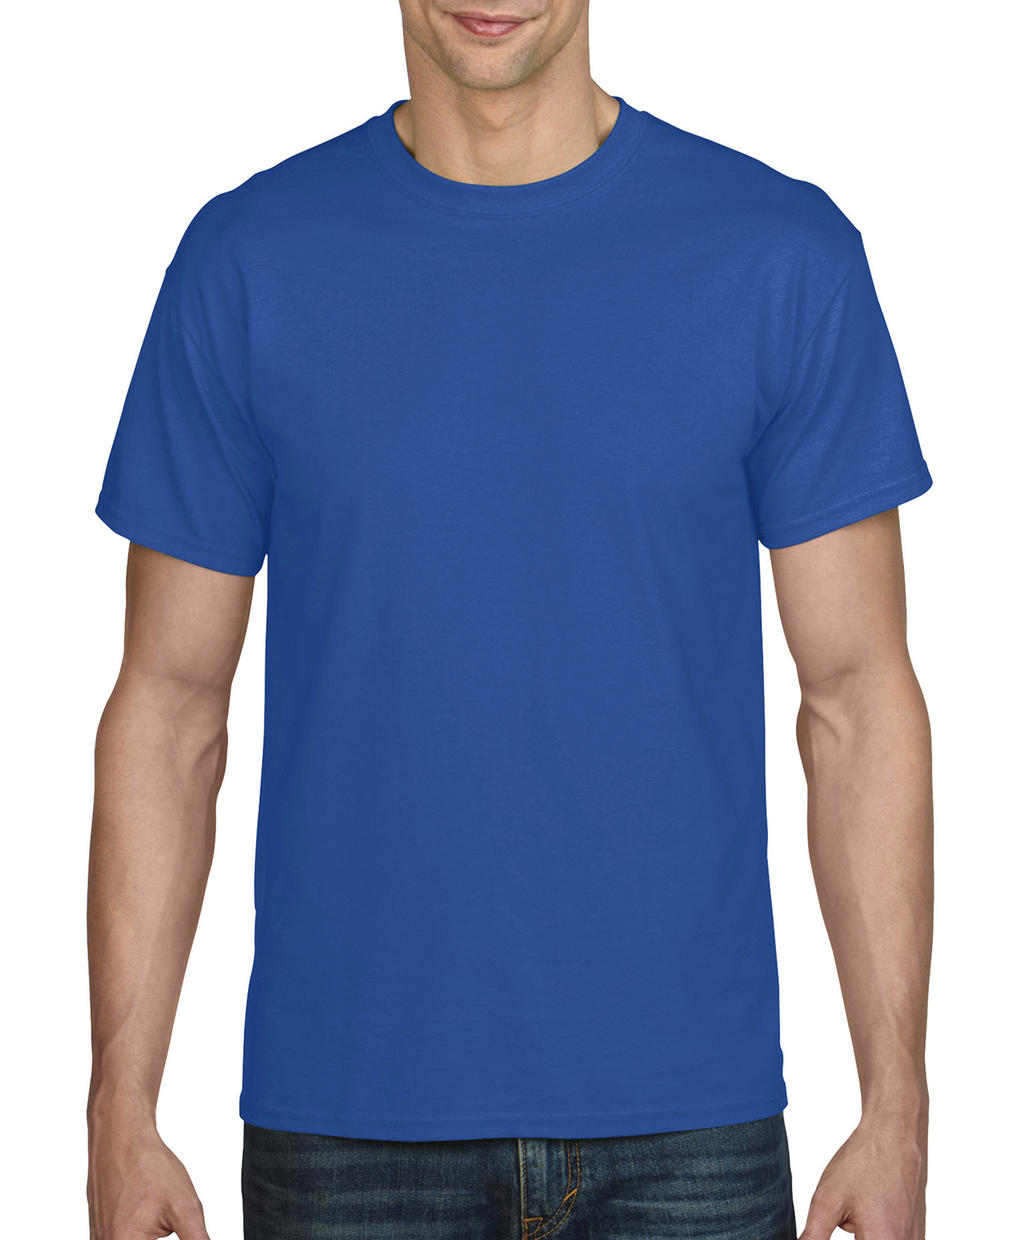  DryBlend? Adult T-Shirt in Farbe Royal